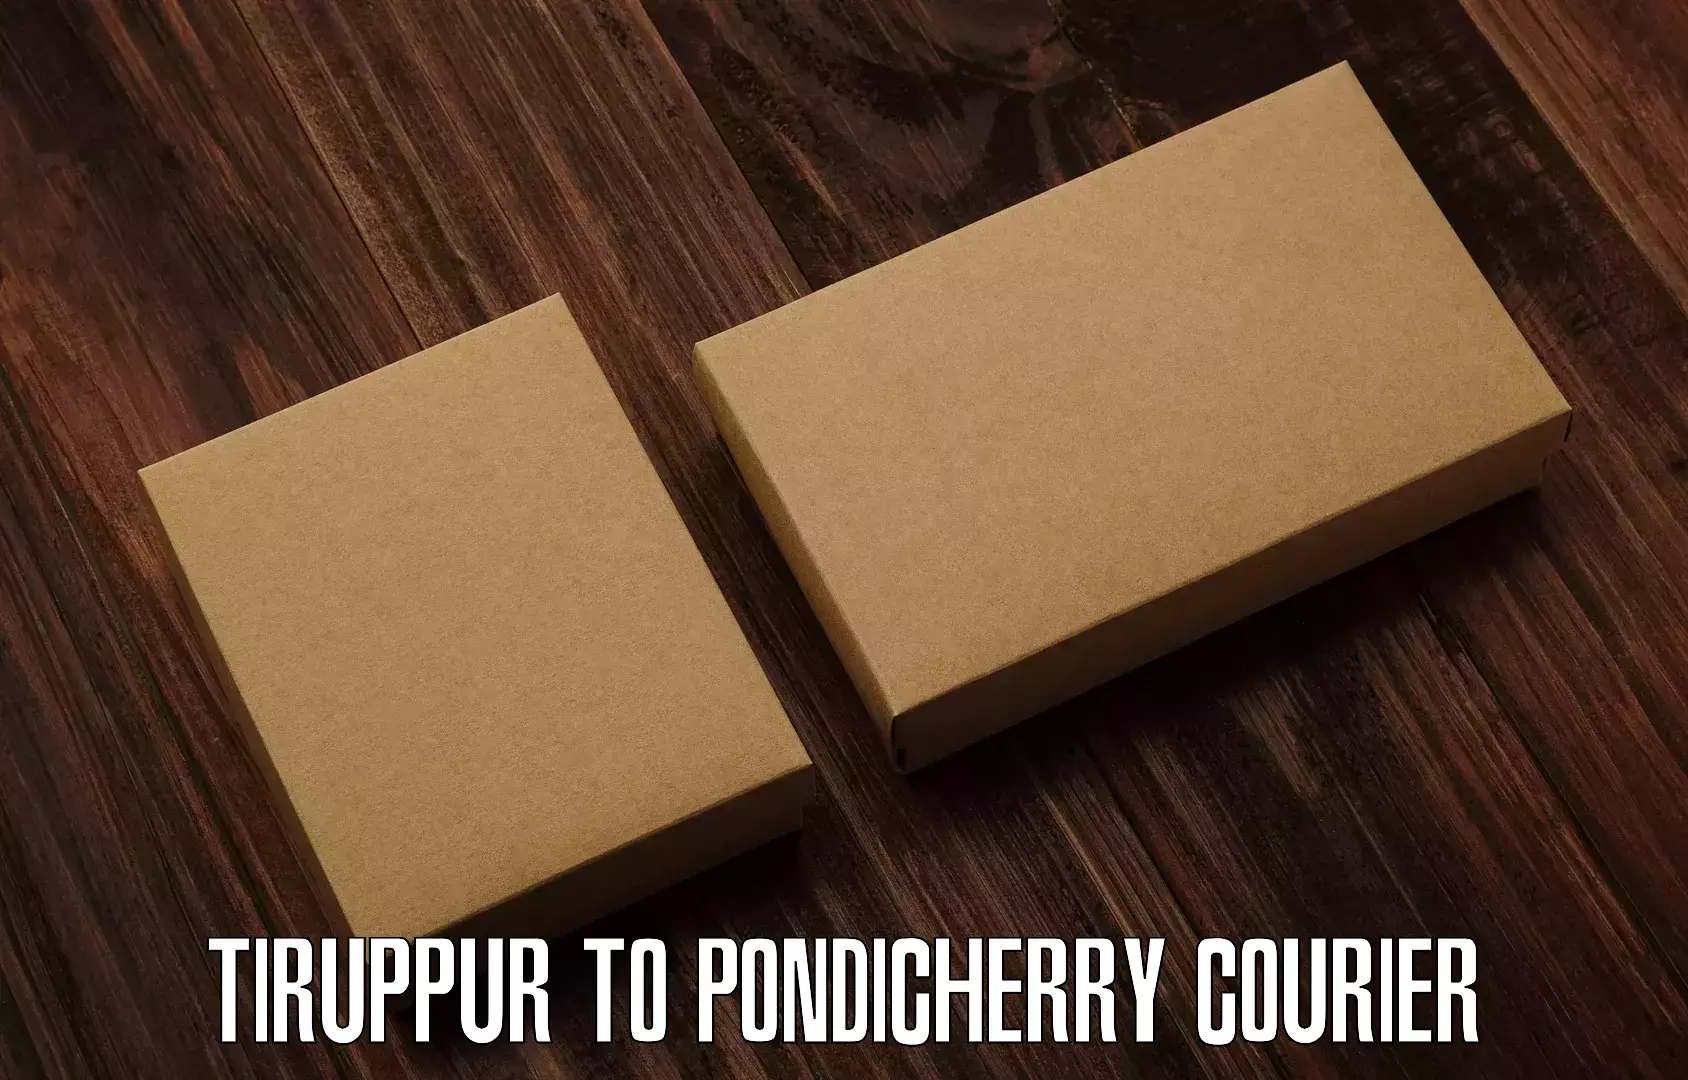 Enhanced delivery experience Tiruppur to Pondicherry